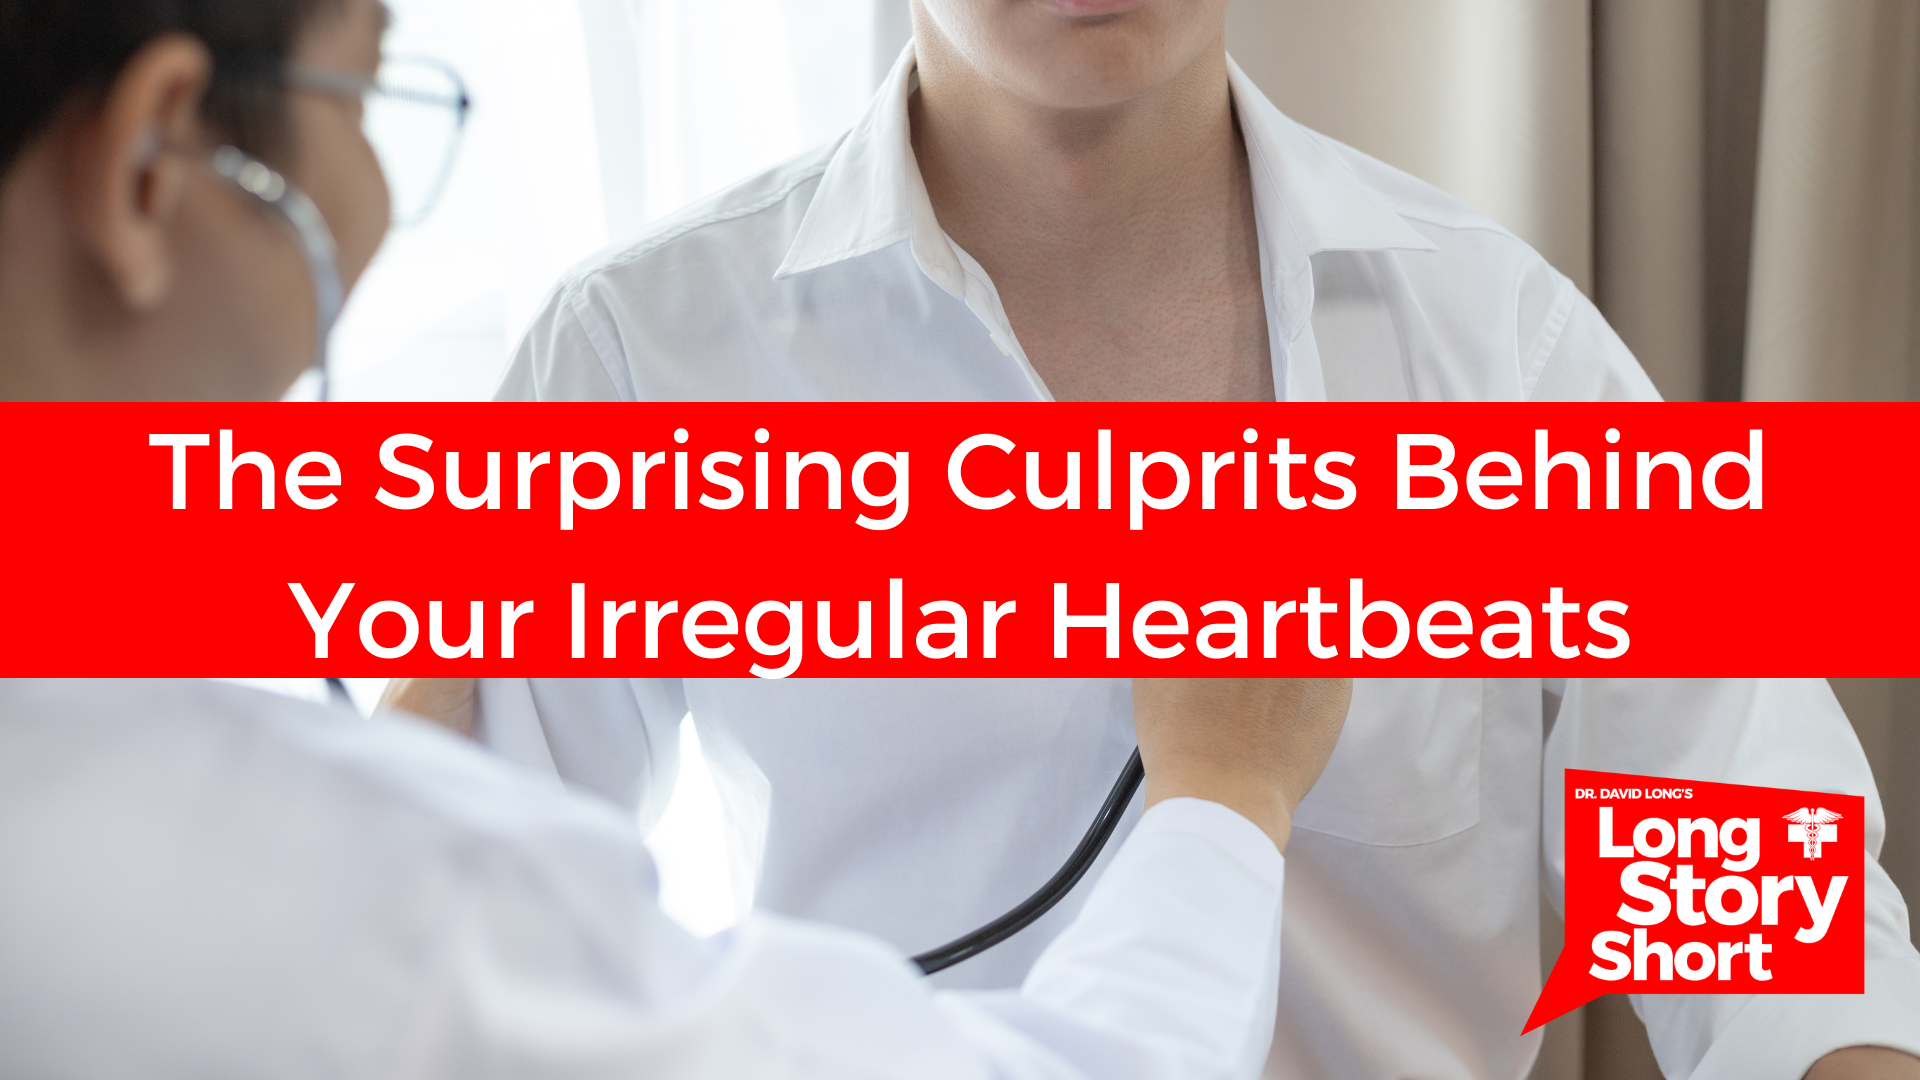 You are currently viewing The Surprising Culprits Behind Your Irregular Heartbeats